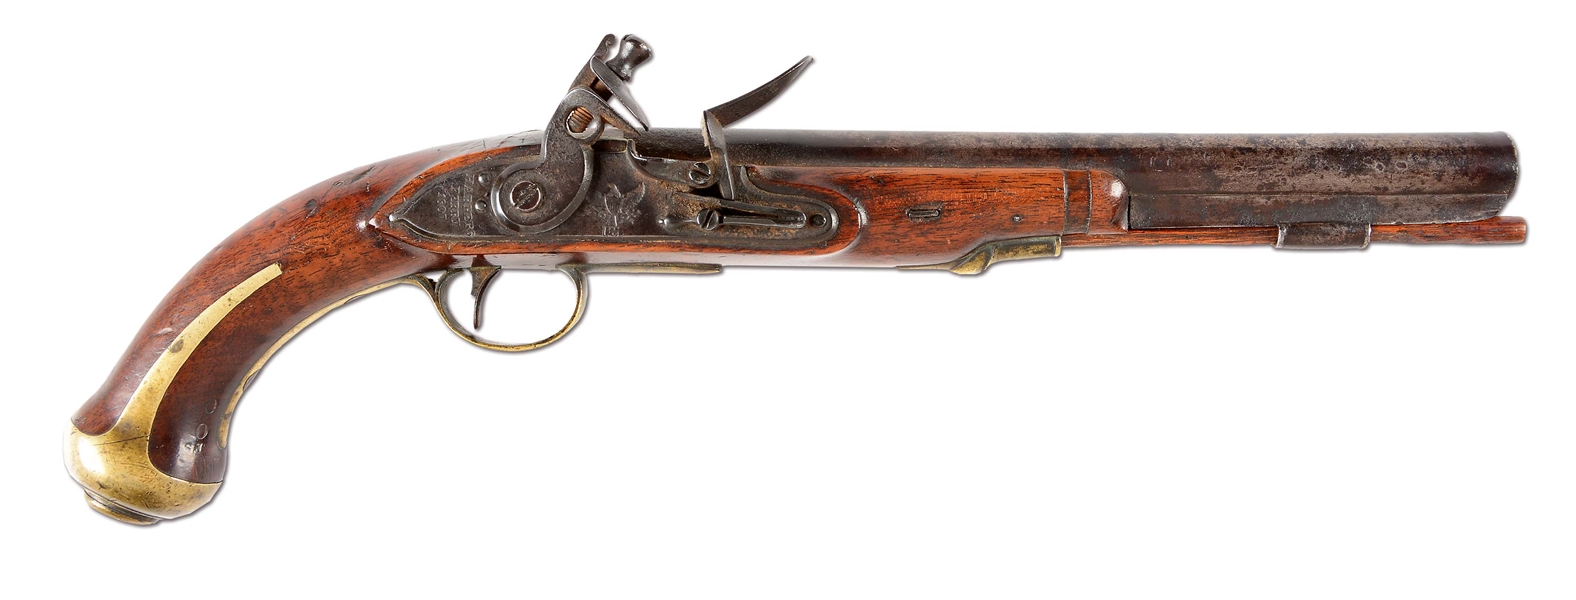 (A) U.S. MODEL 1805 HARPERS FERRY FLINTLOCK PISTOL, NEW TO MARKET, JUST DISCOVERED, WITH PROVENANCE.